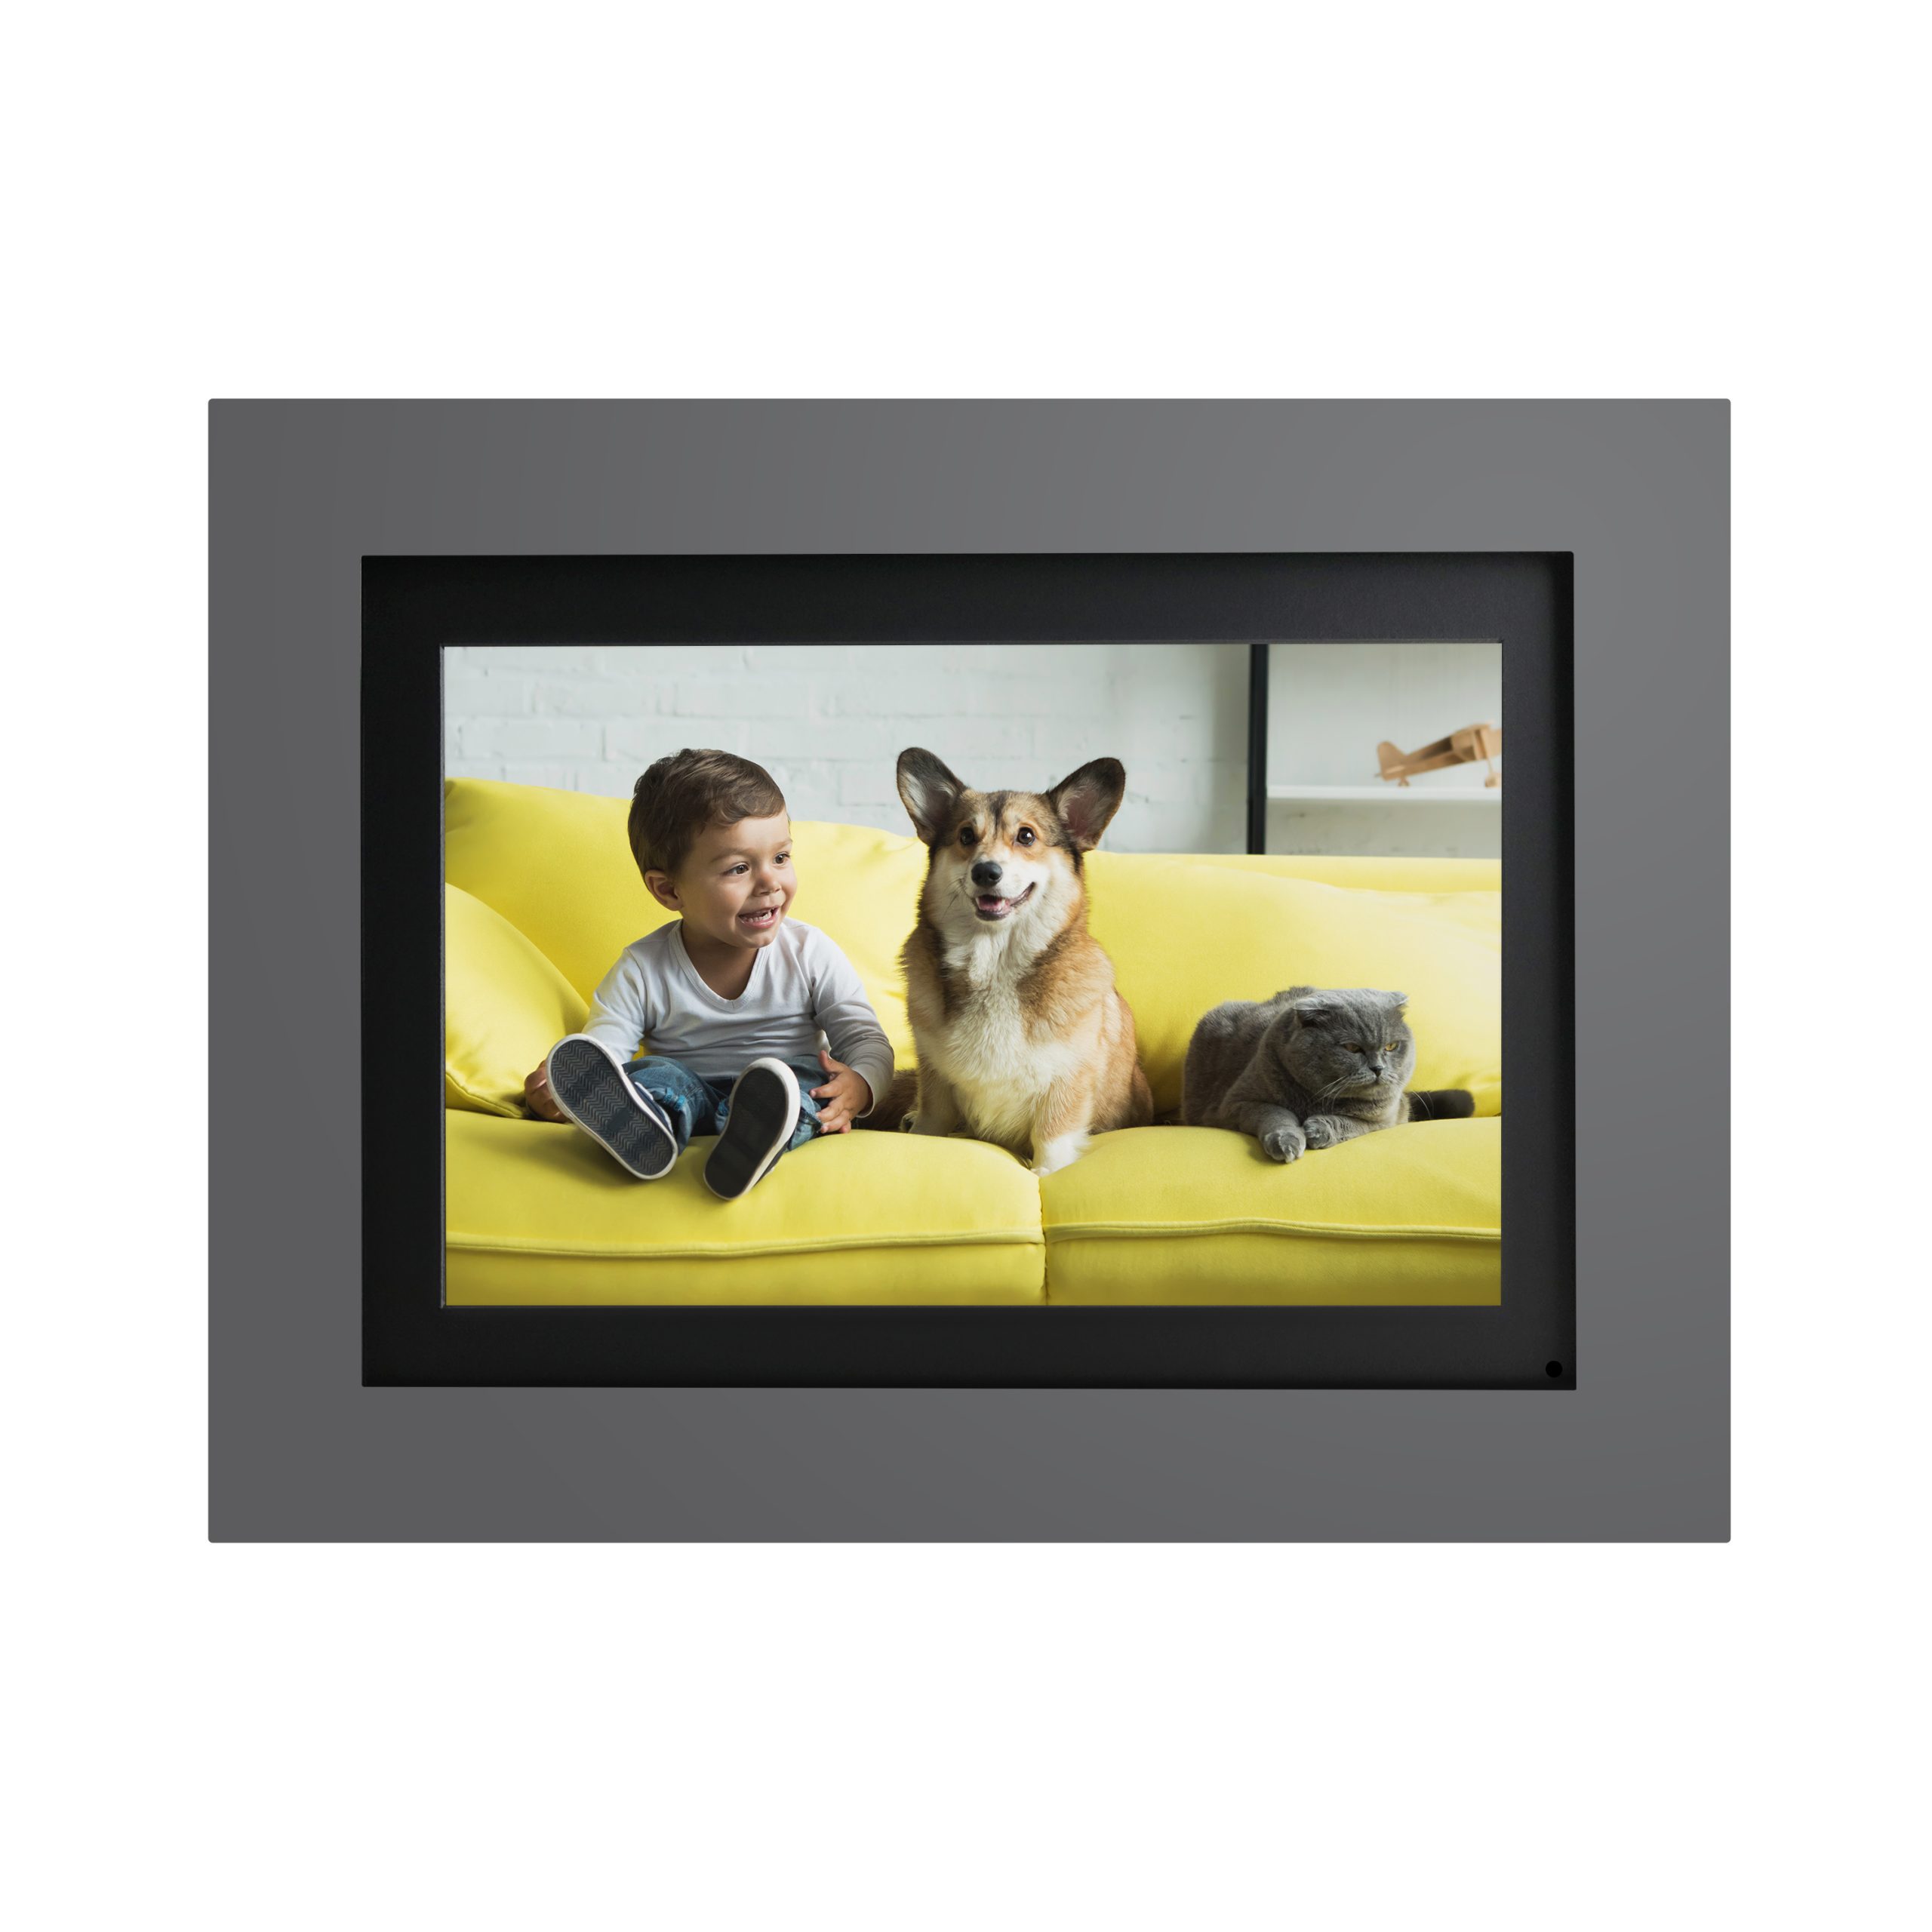 undefined | PhotoShare WiFi Digital Picture Frame